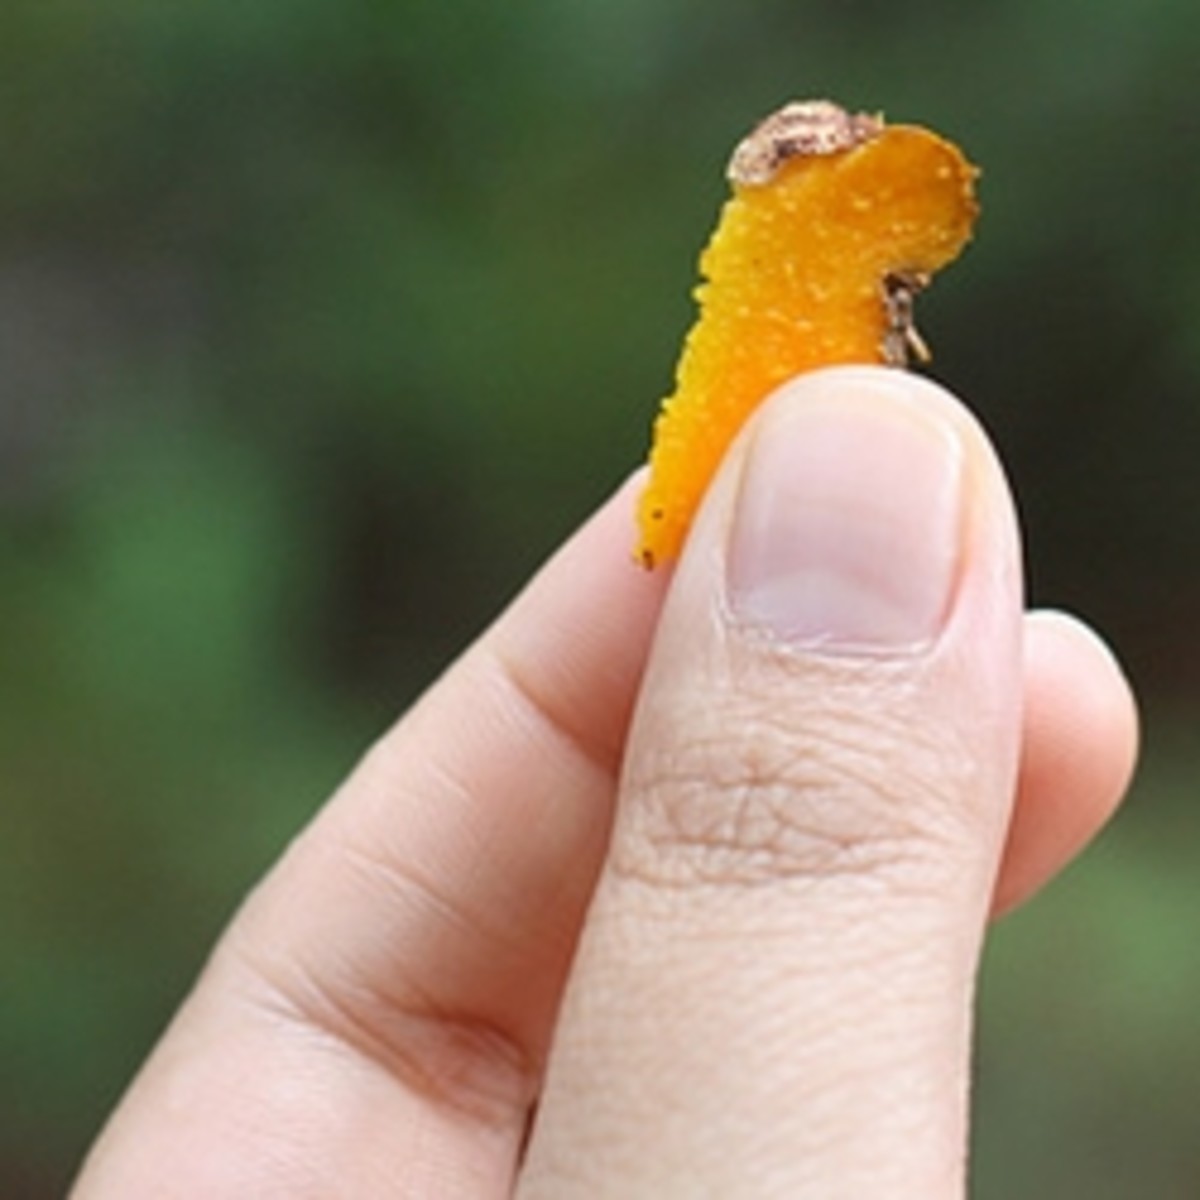 A piece of Turmeric tuber showing the vibrant orange color